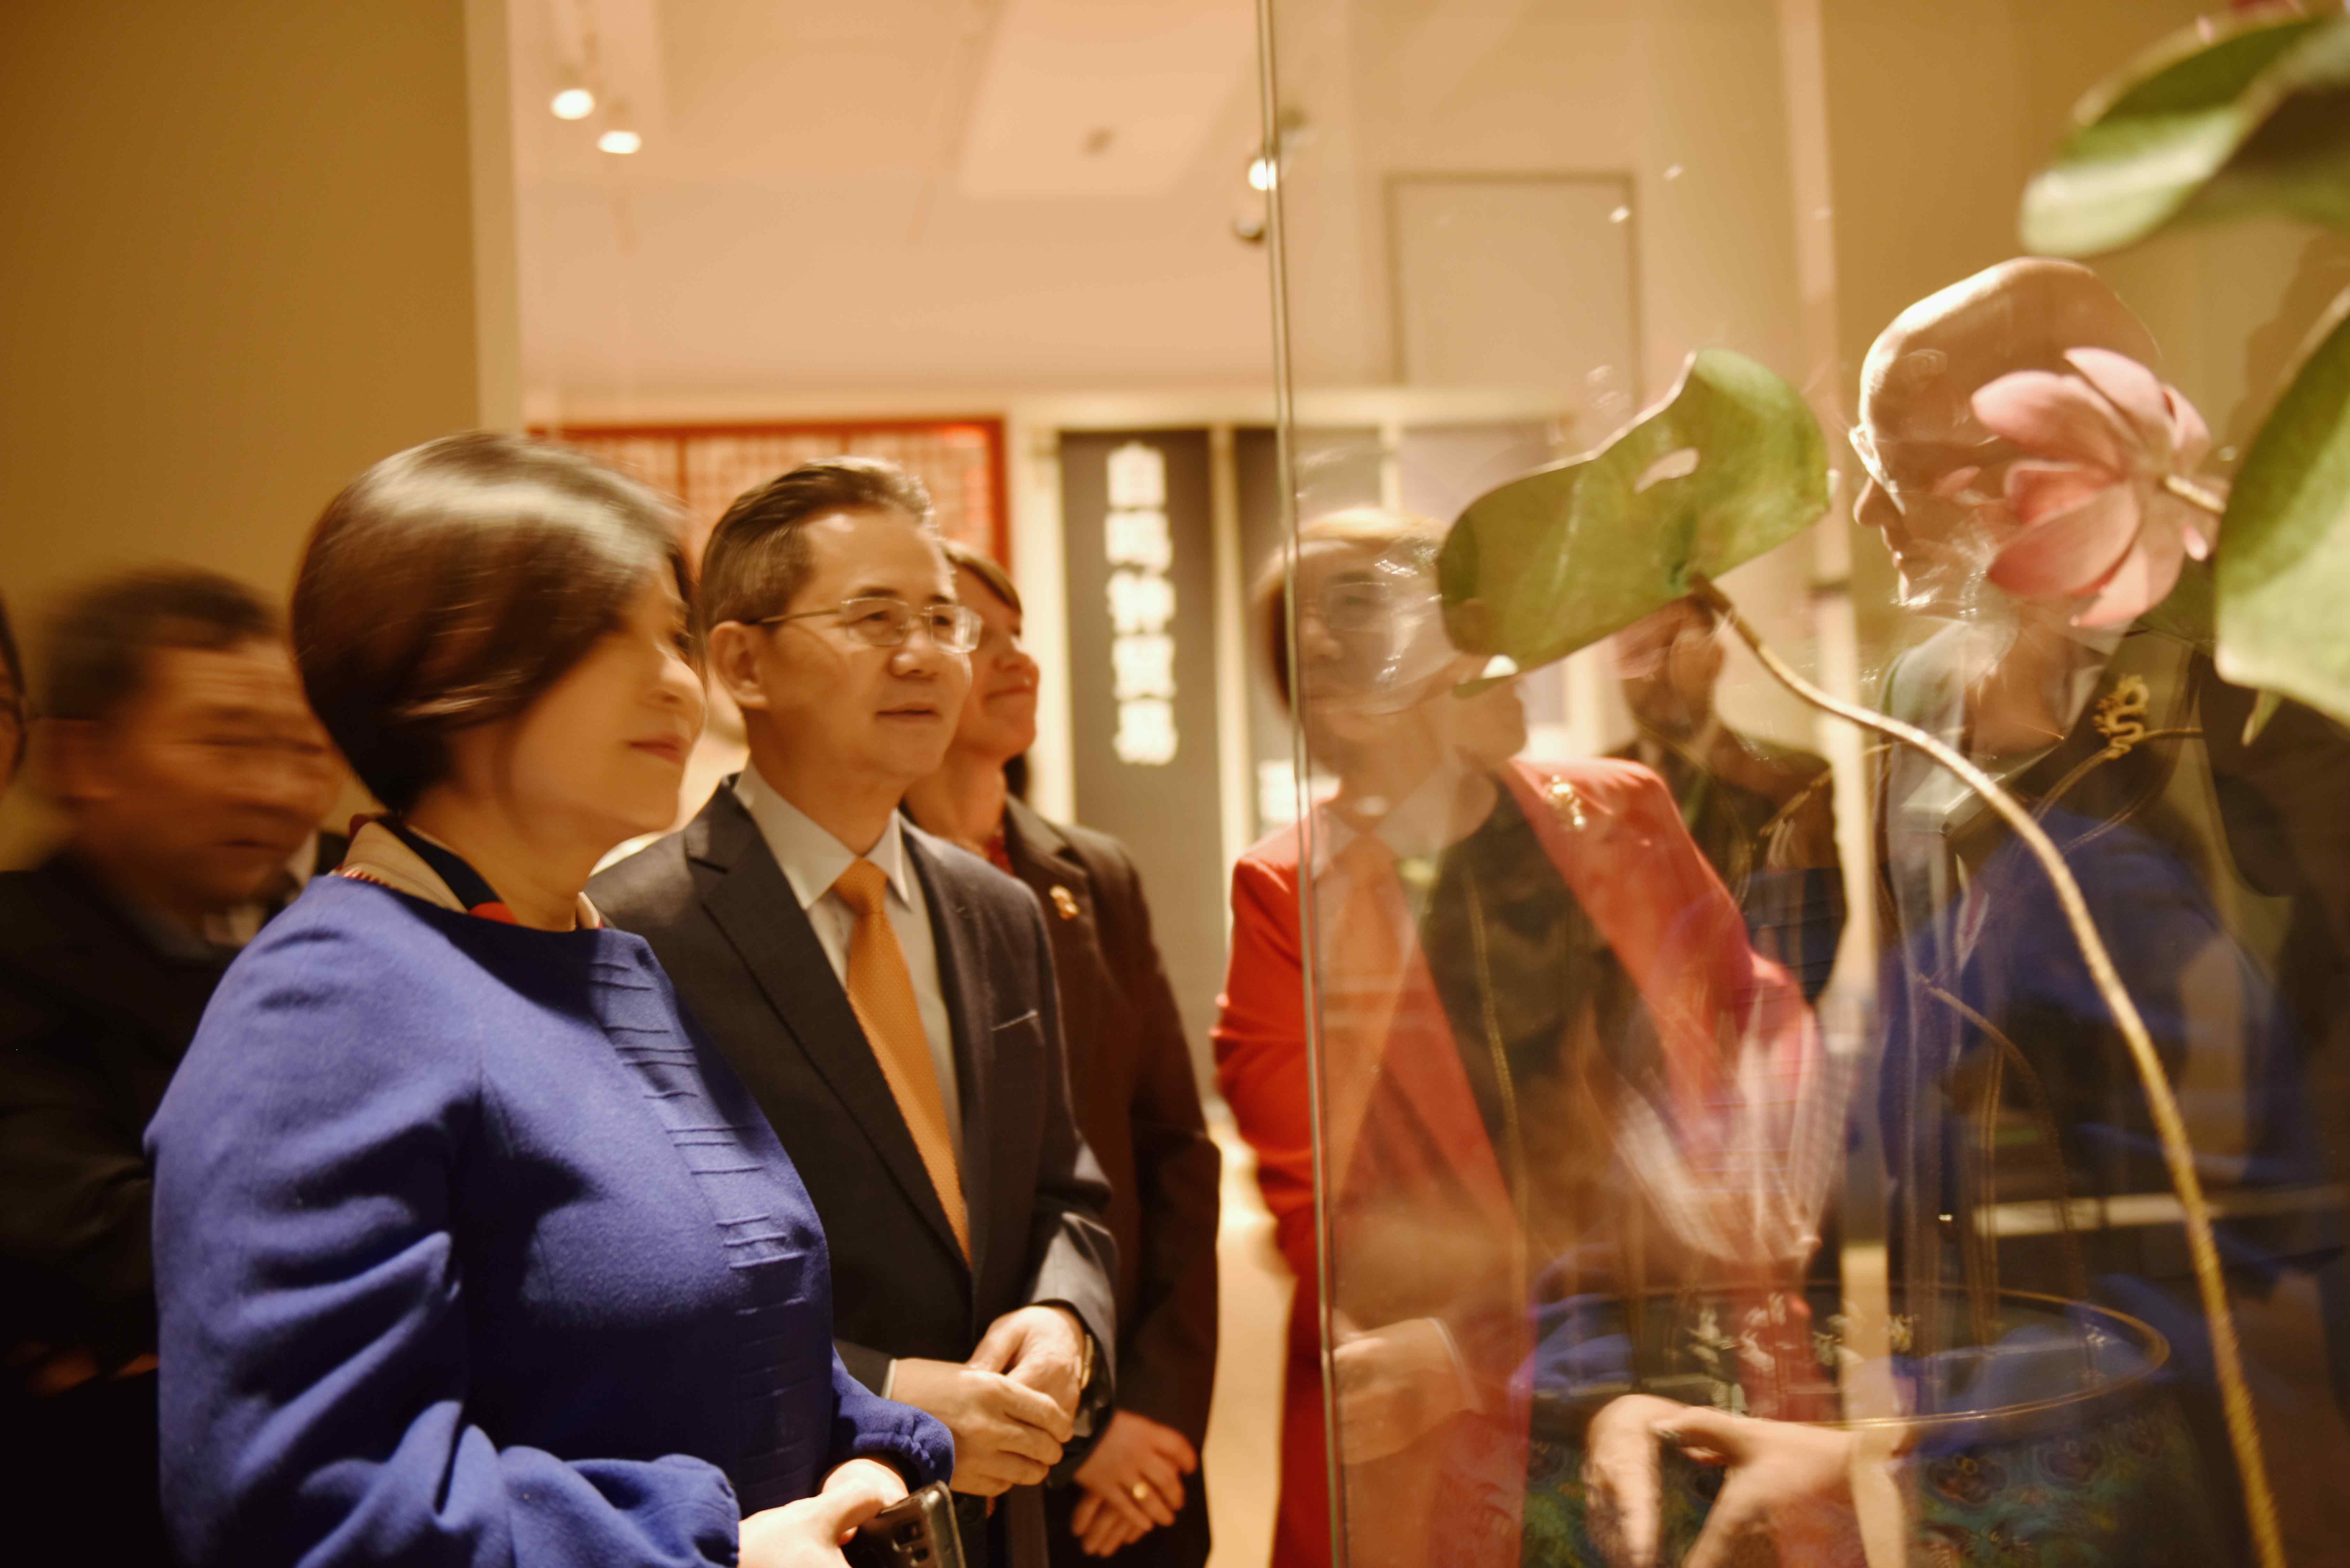 Chinese ambassador to the UK Zheng Zeguang visiting the Zimingzhong exhibition by the Science Museum and the Palace Museum. /CGTN Europe